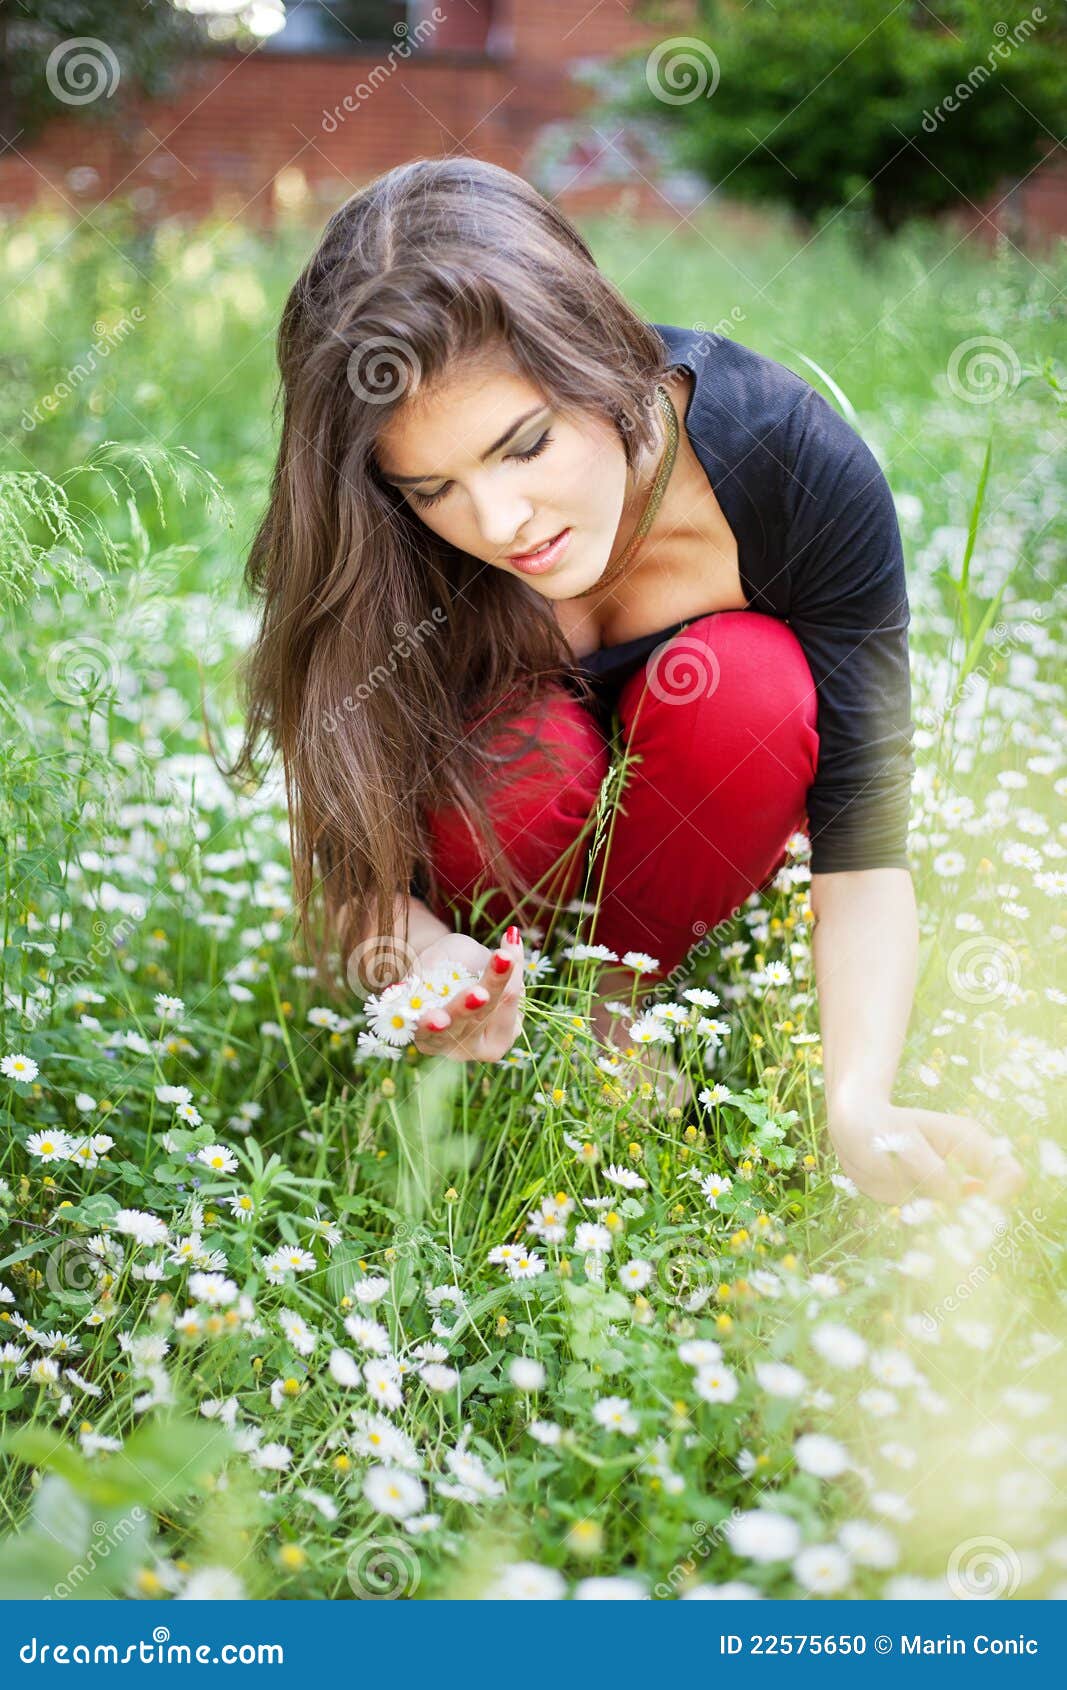 woman in park gather spring flowers